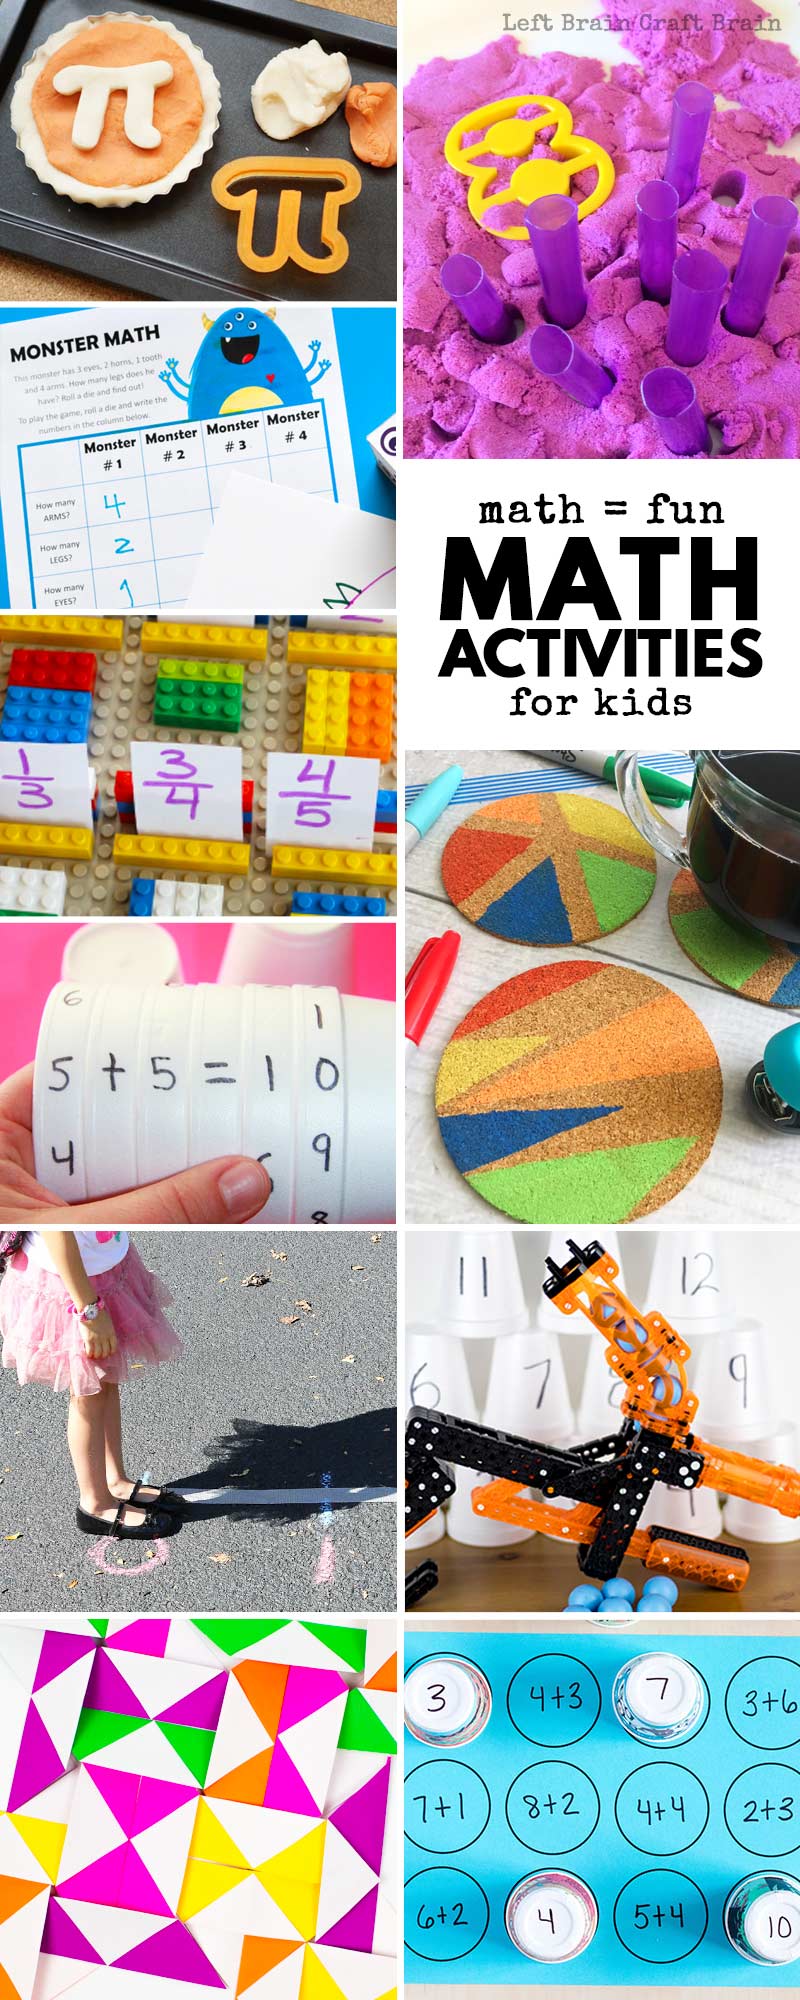 Whether you're practicing math facts or adding new math concepts to your kid's growing math knowledge, these math activities for kids are meant for you to help your kids thrive in our competitive real world. Tons of math printables, hands-on math activities, math games, and more.